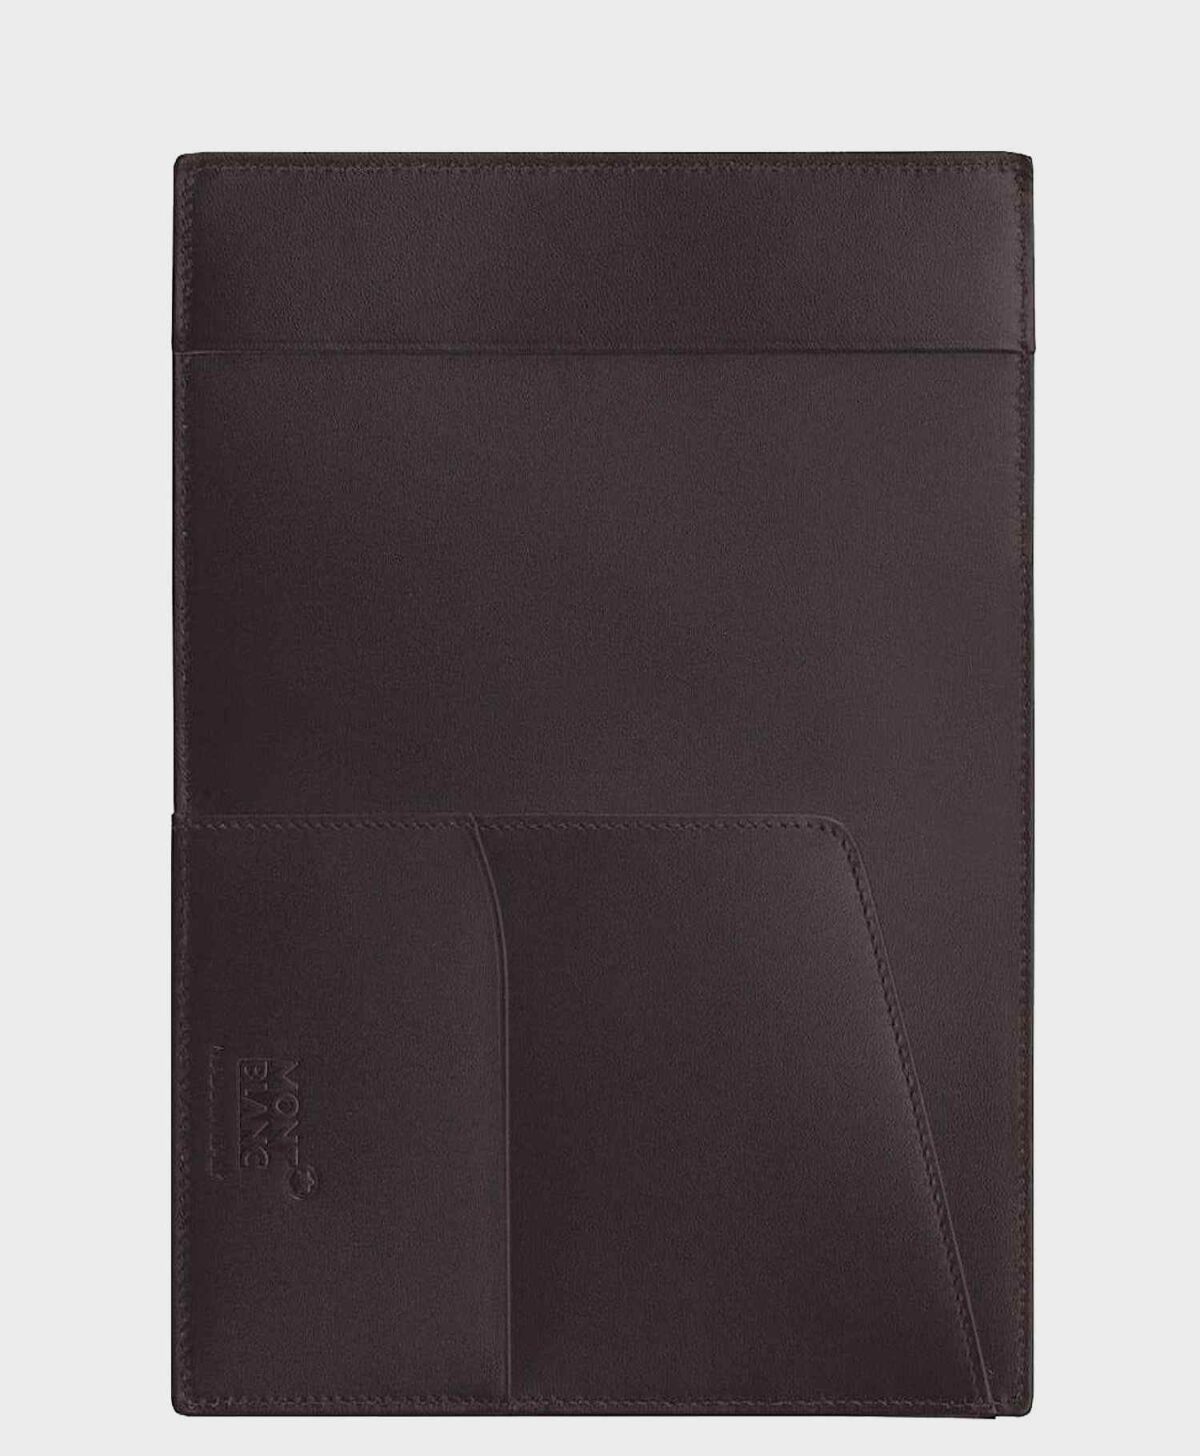 Montblanc Meisterstuck Leather Passport and Card Holder MB-114572